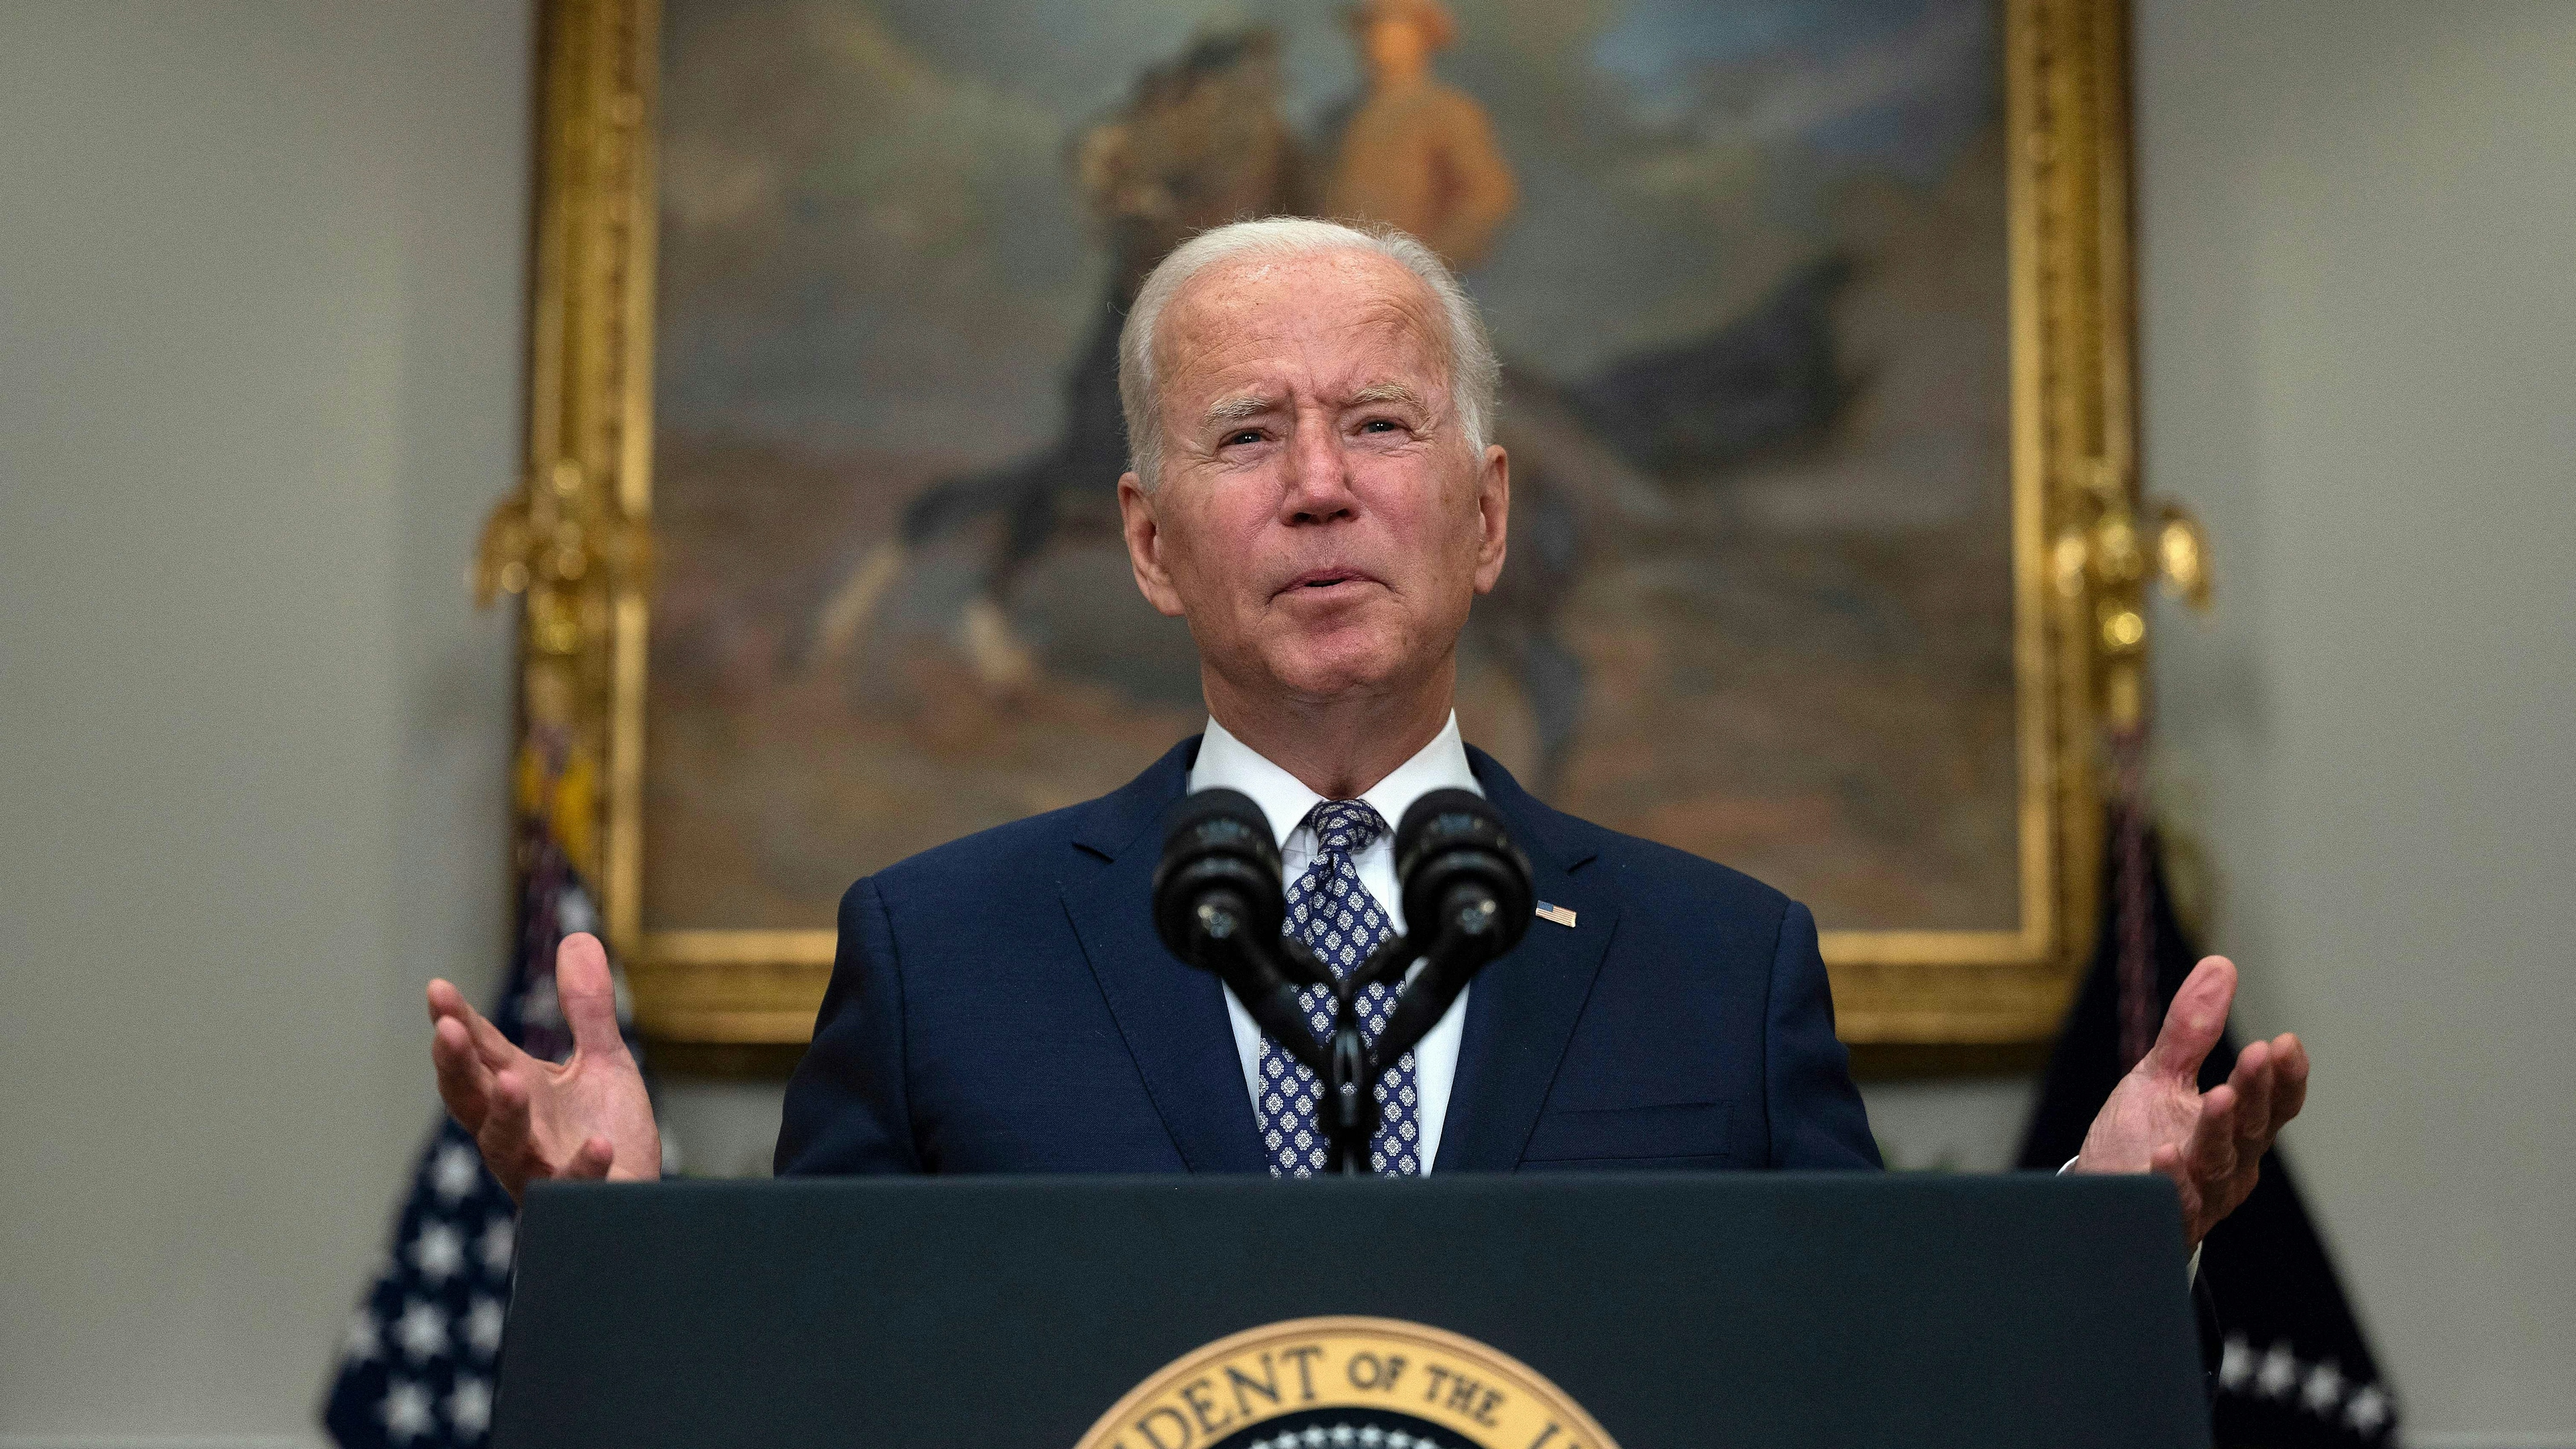 US President Joe Biden speaks about the ongoing evacuation of Afghanistan